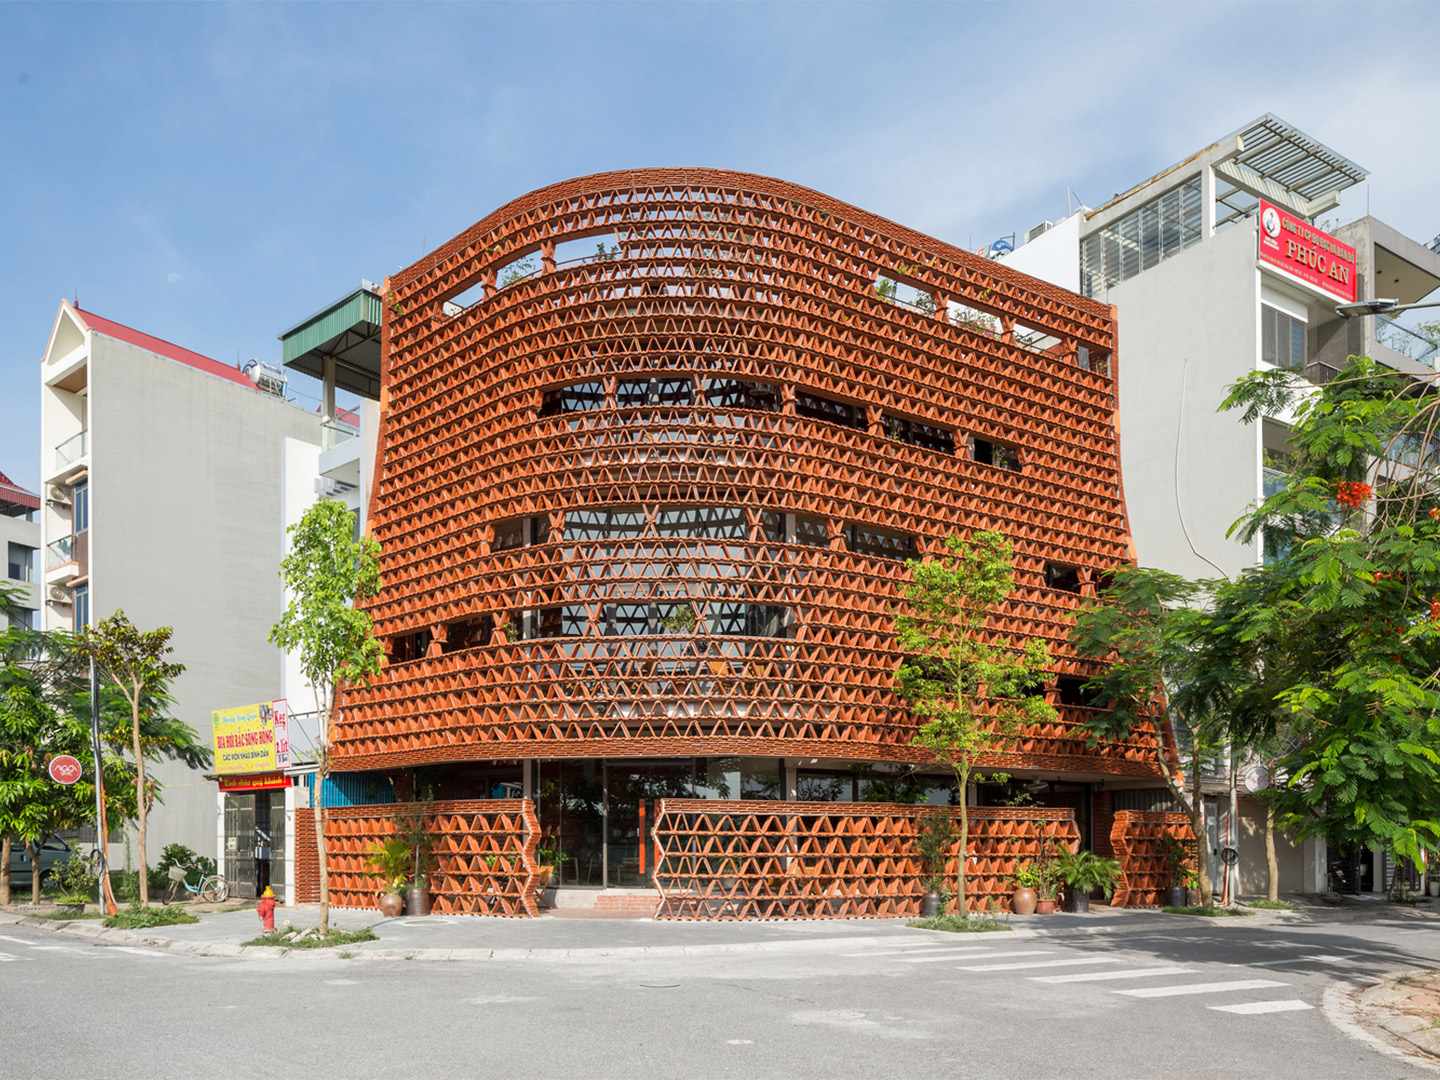 Ngói Space in Vietnam near Nahoi designed by H&P Architects